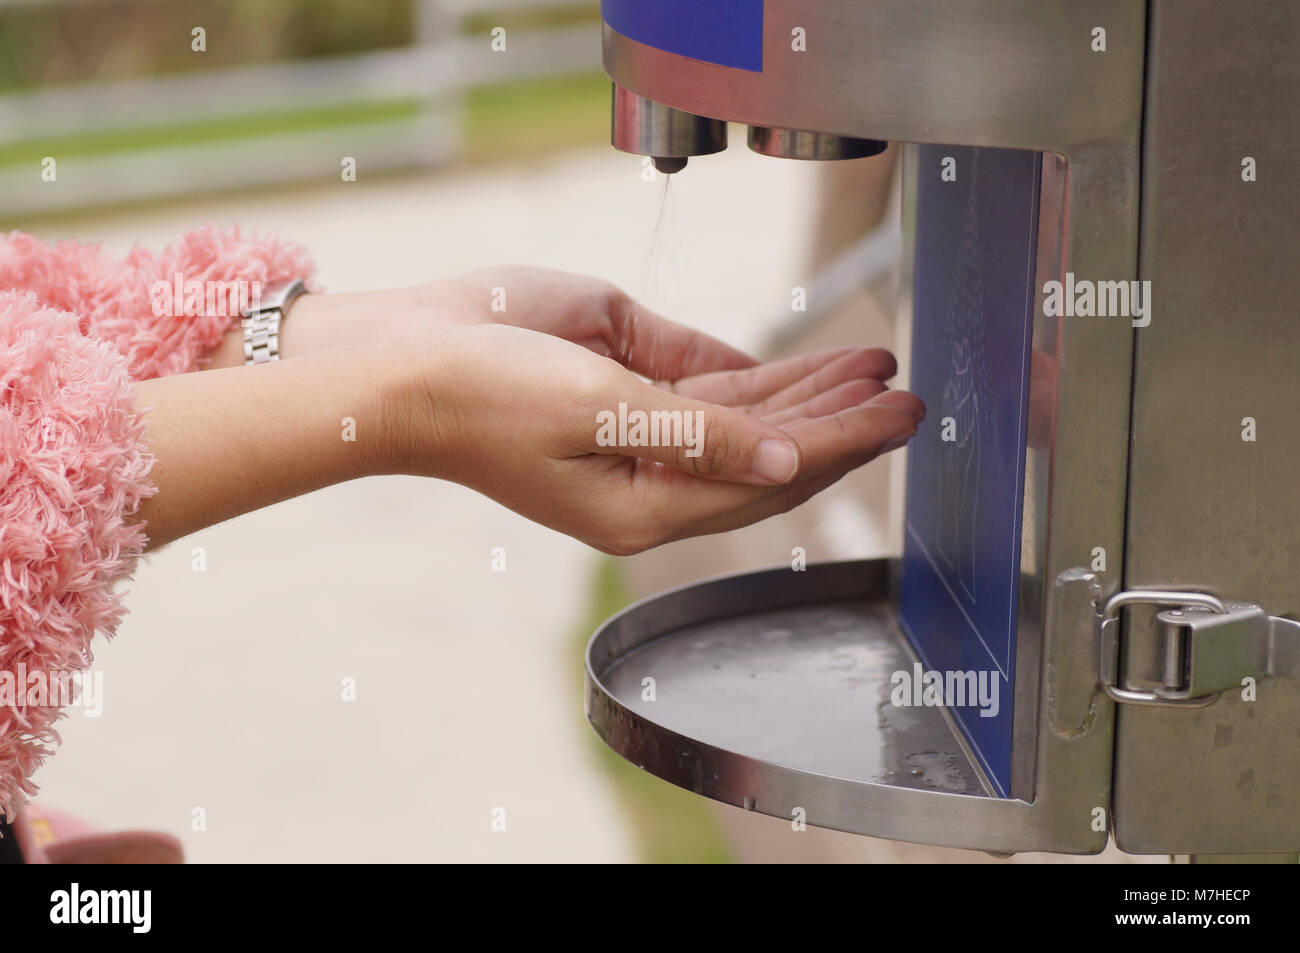 hand of women washing with automatic alcohol dispenser for cleaning and healthy care Stock Photo